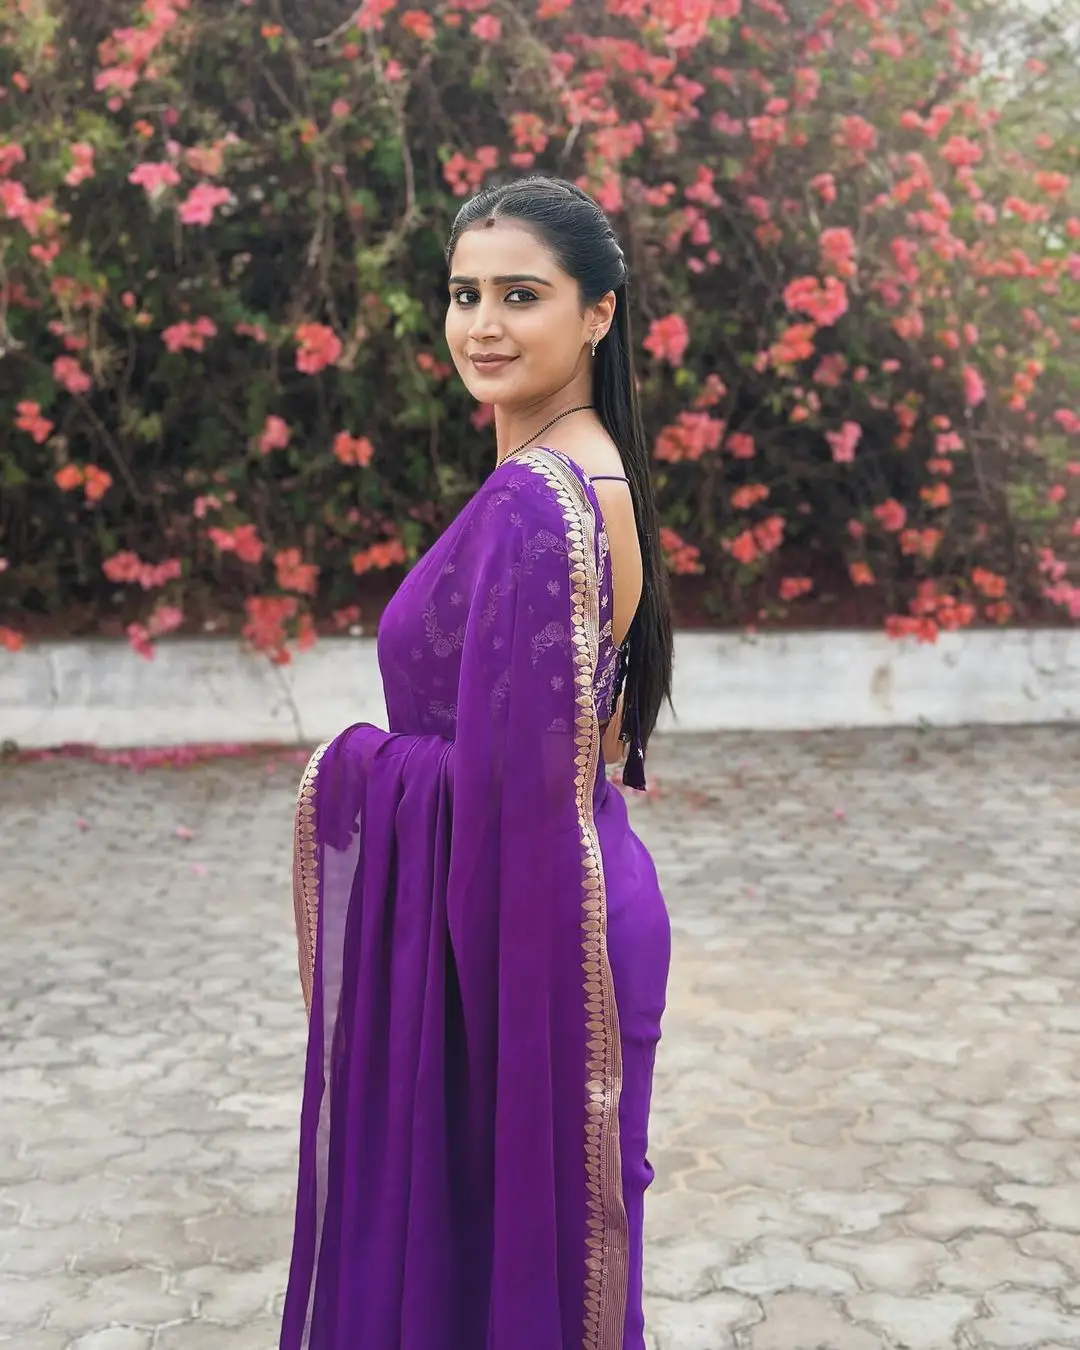 INDIAN GIRL KAVYA SHREE IN TRADITIONAL VIOLET SAREE BLOUSE 4